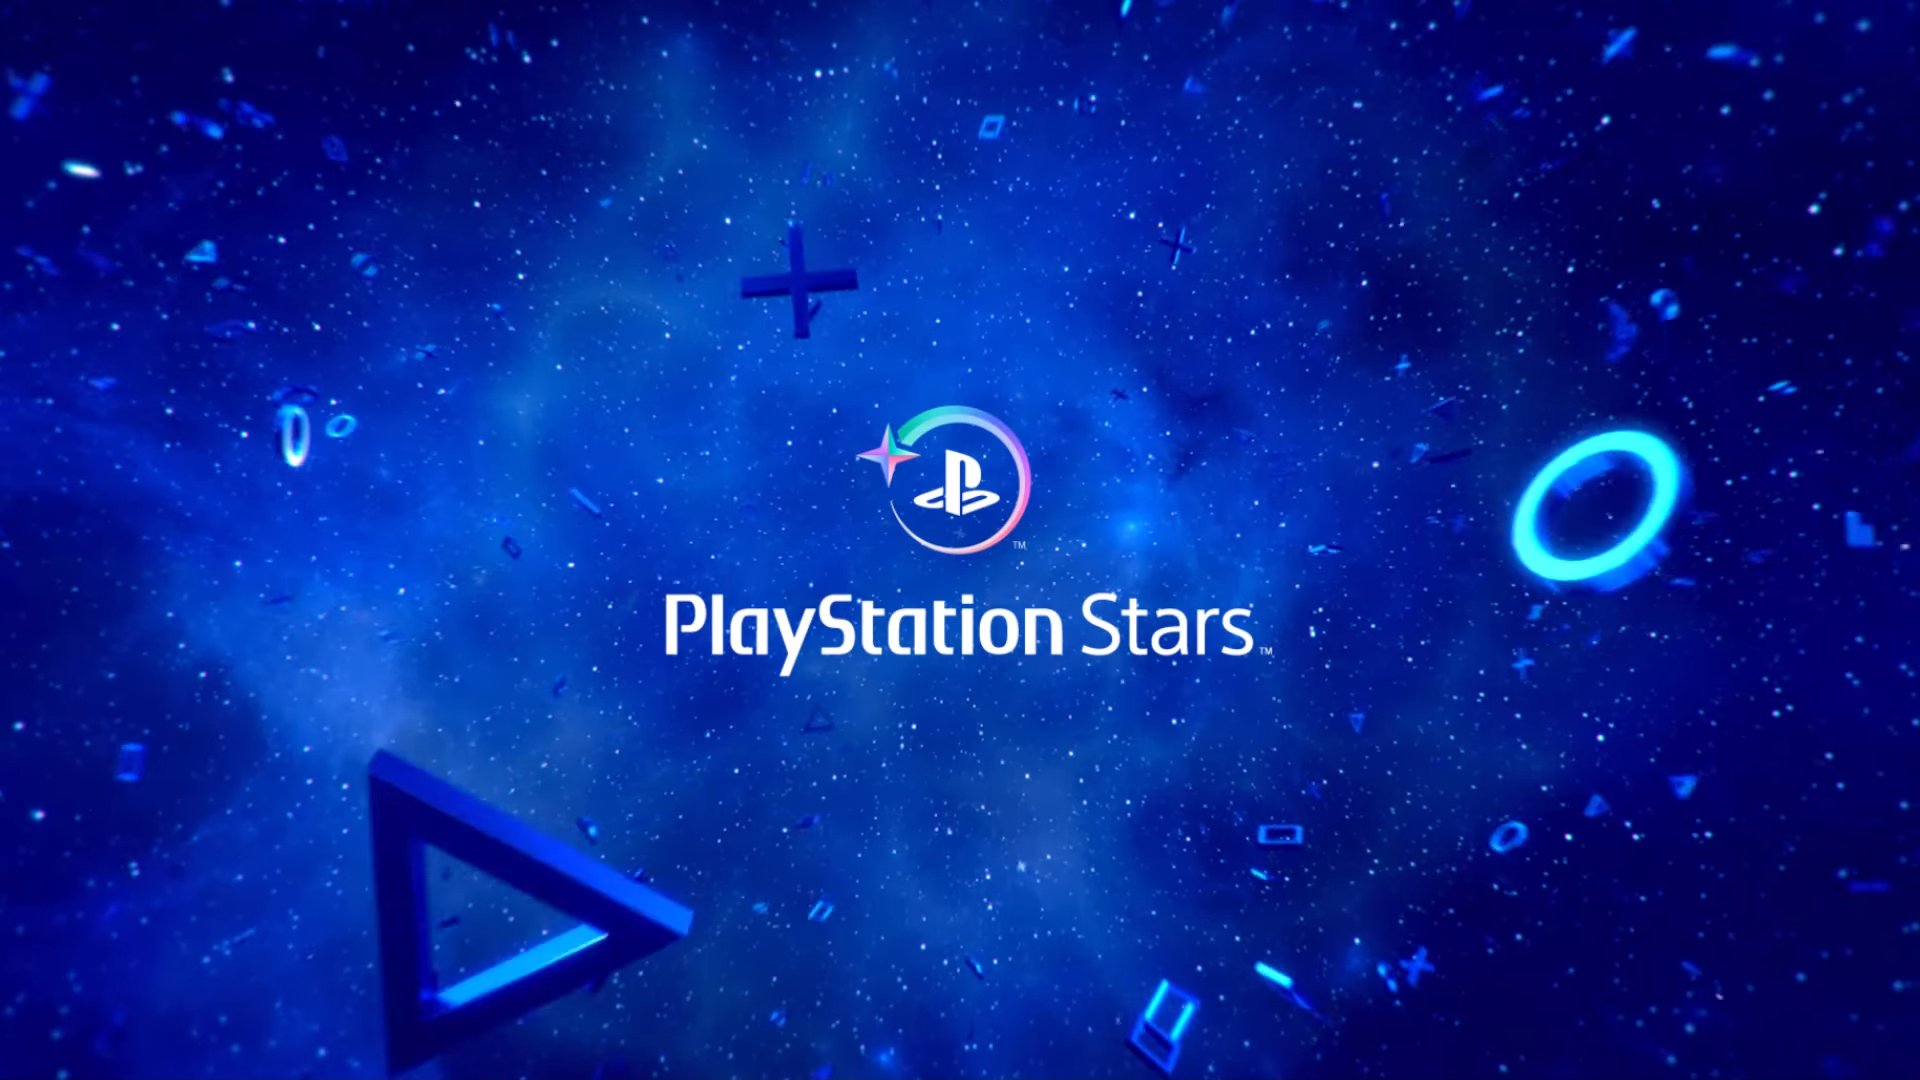 PlayStation Stars is available in North American countries